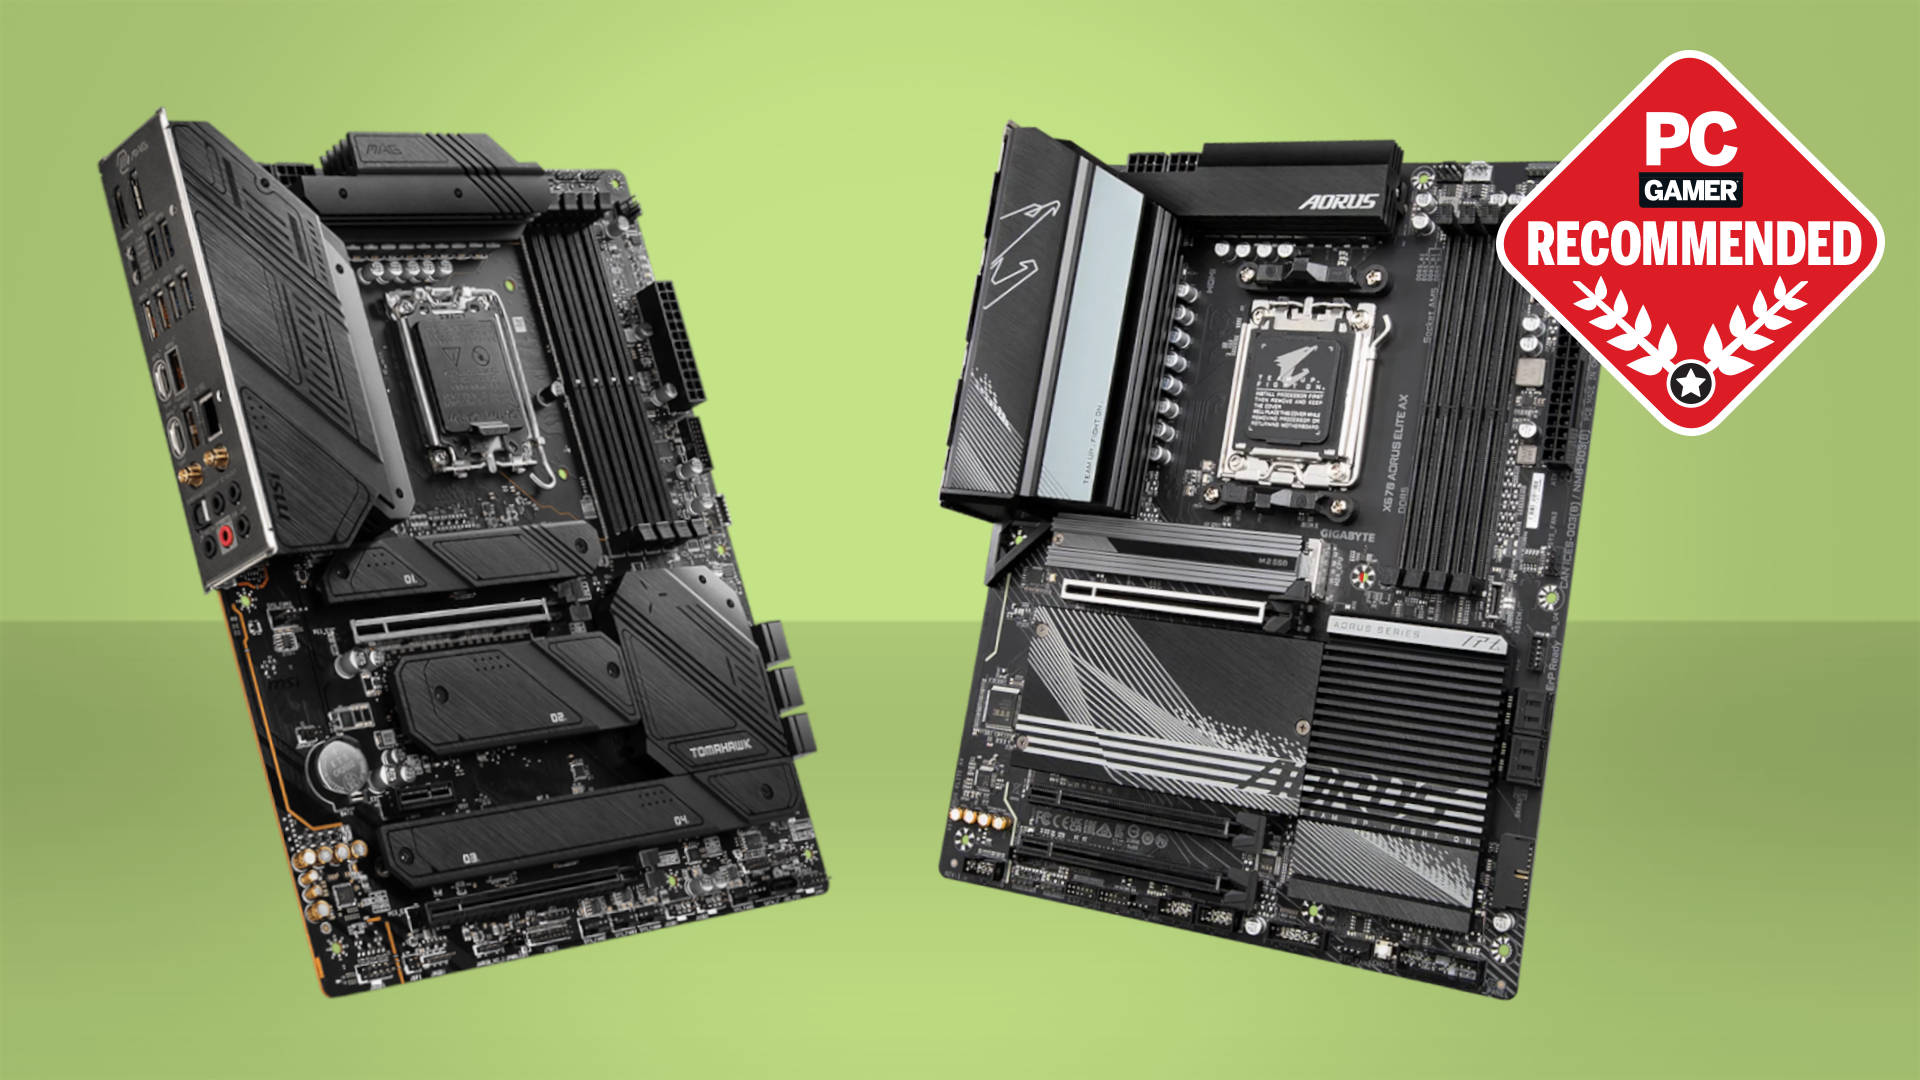 AORUS - B550 GAMING X V2 motherboard with 10+3 Phases